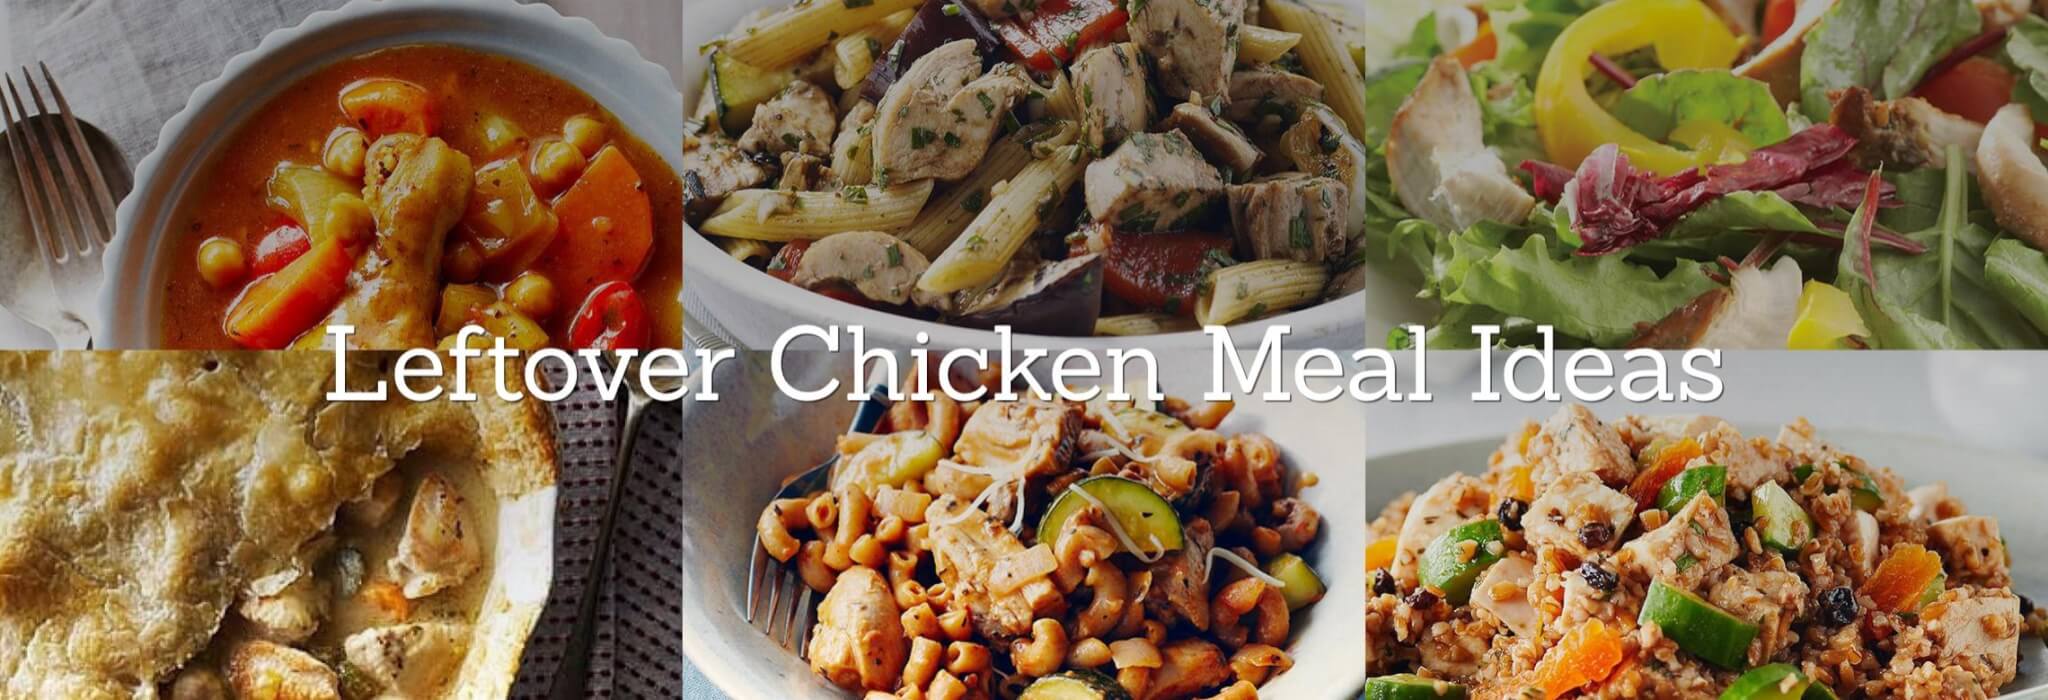 Leftover Meal Ideas